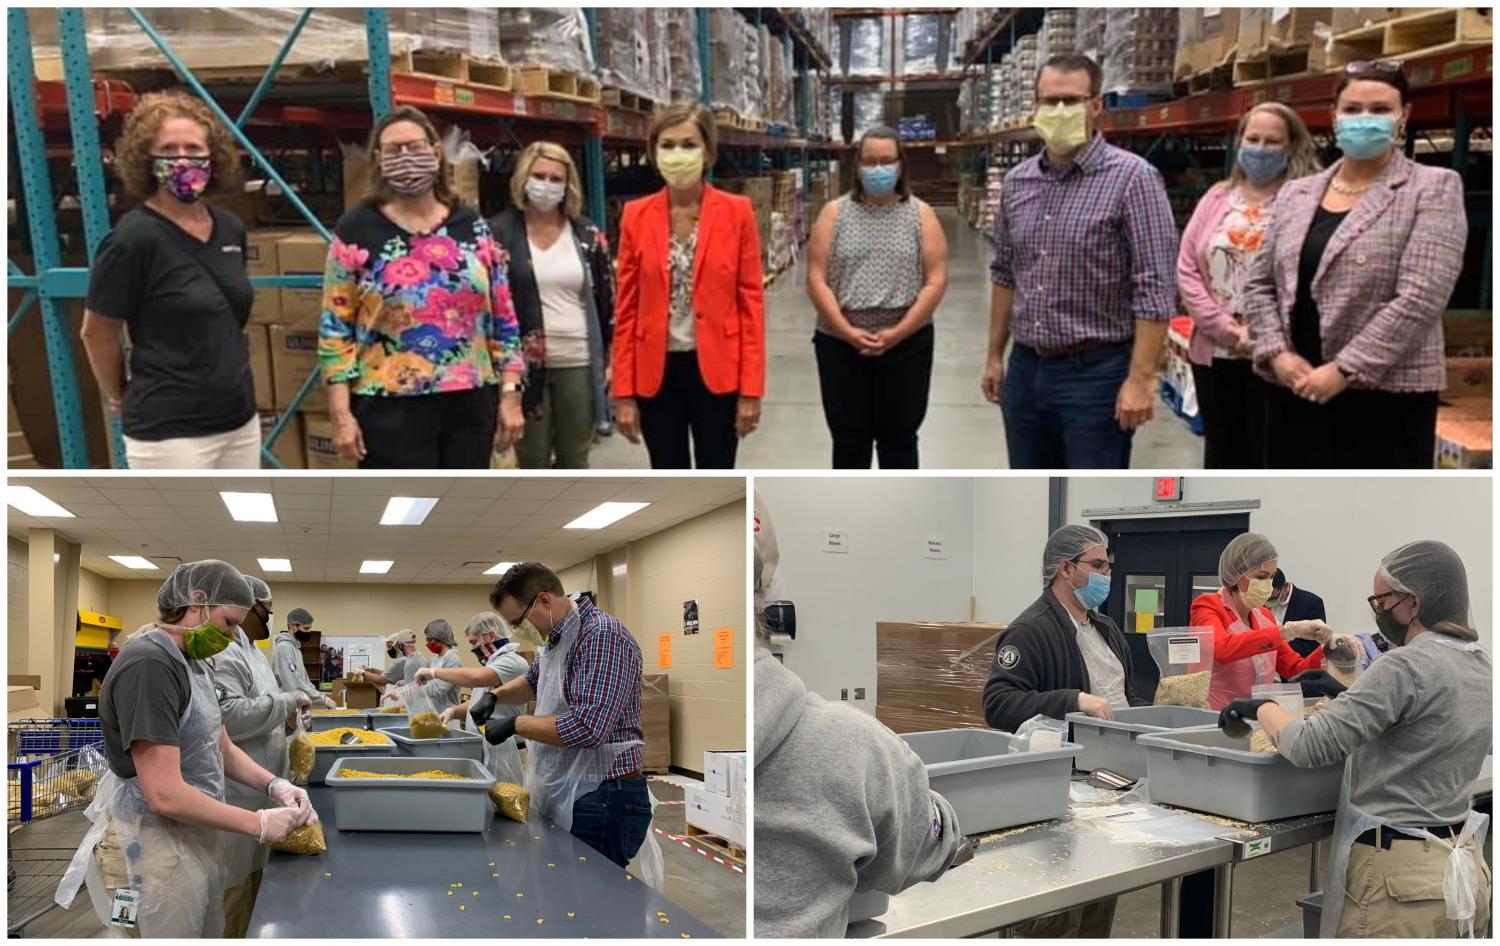 Governor Reynolds served alongside AmeriCorps members, learning about new initiatives in Iowa to address rising food insecurity as a result of COVID-19 and the economic recession. 